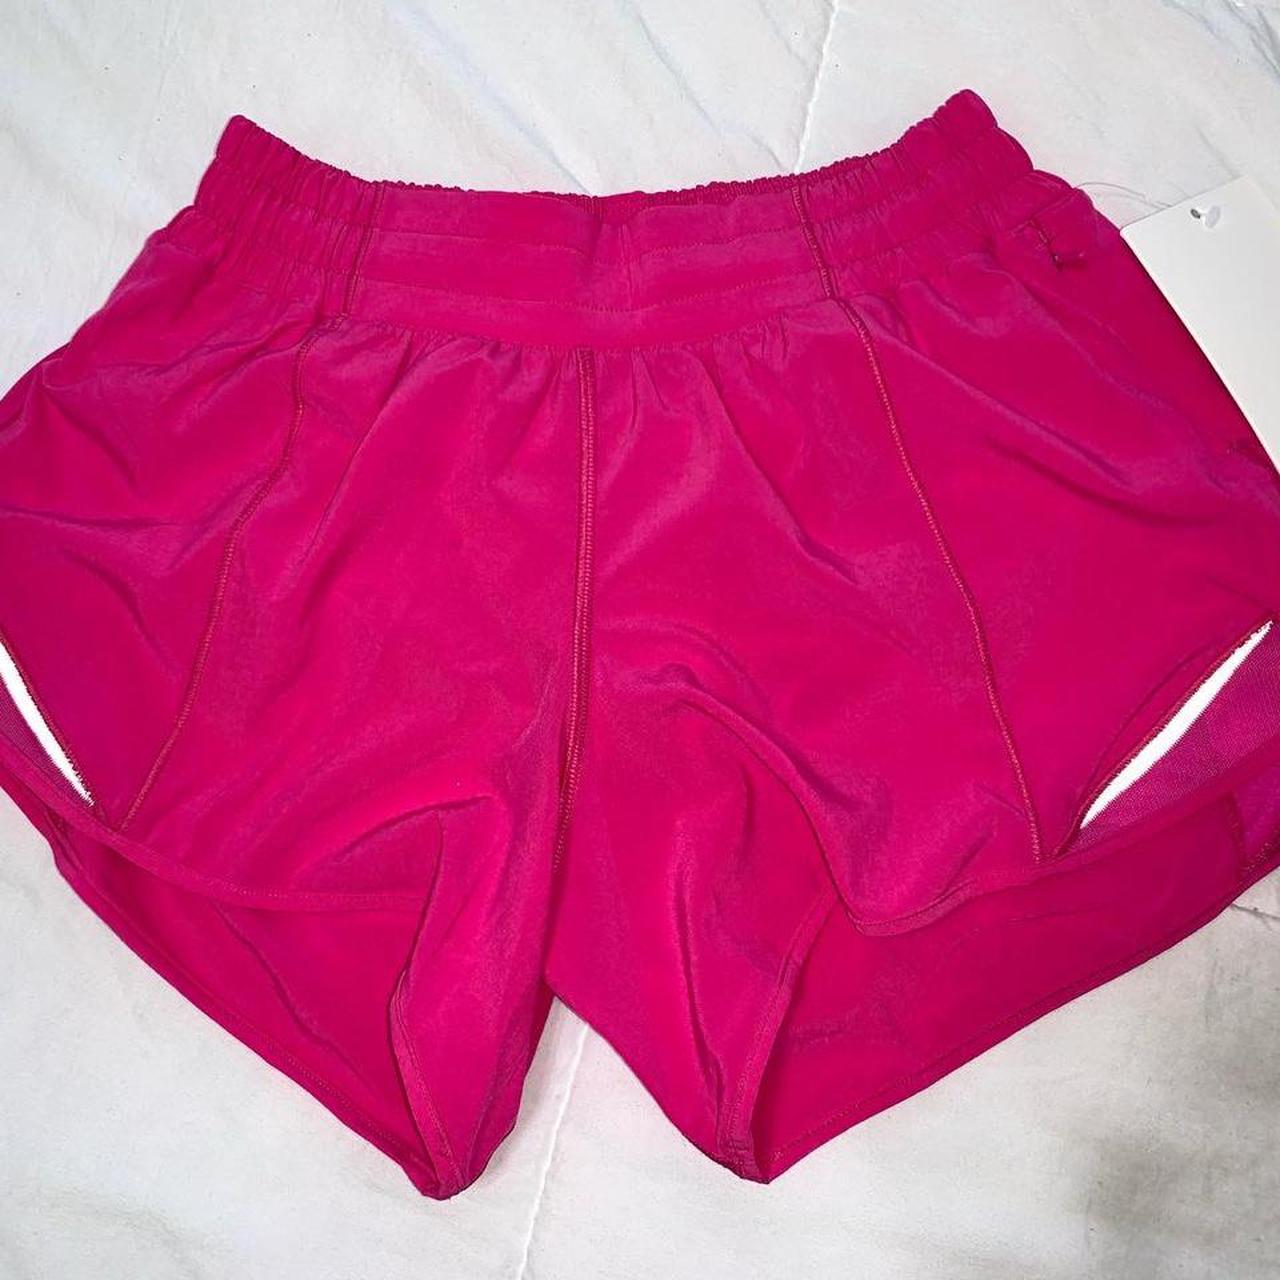 lululemon Hotty Hot Shorts Inseam 4” Low Rise Sonic Pink Size 8 NWT!